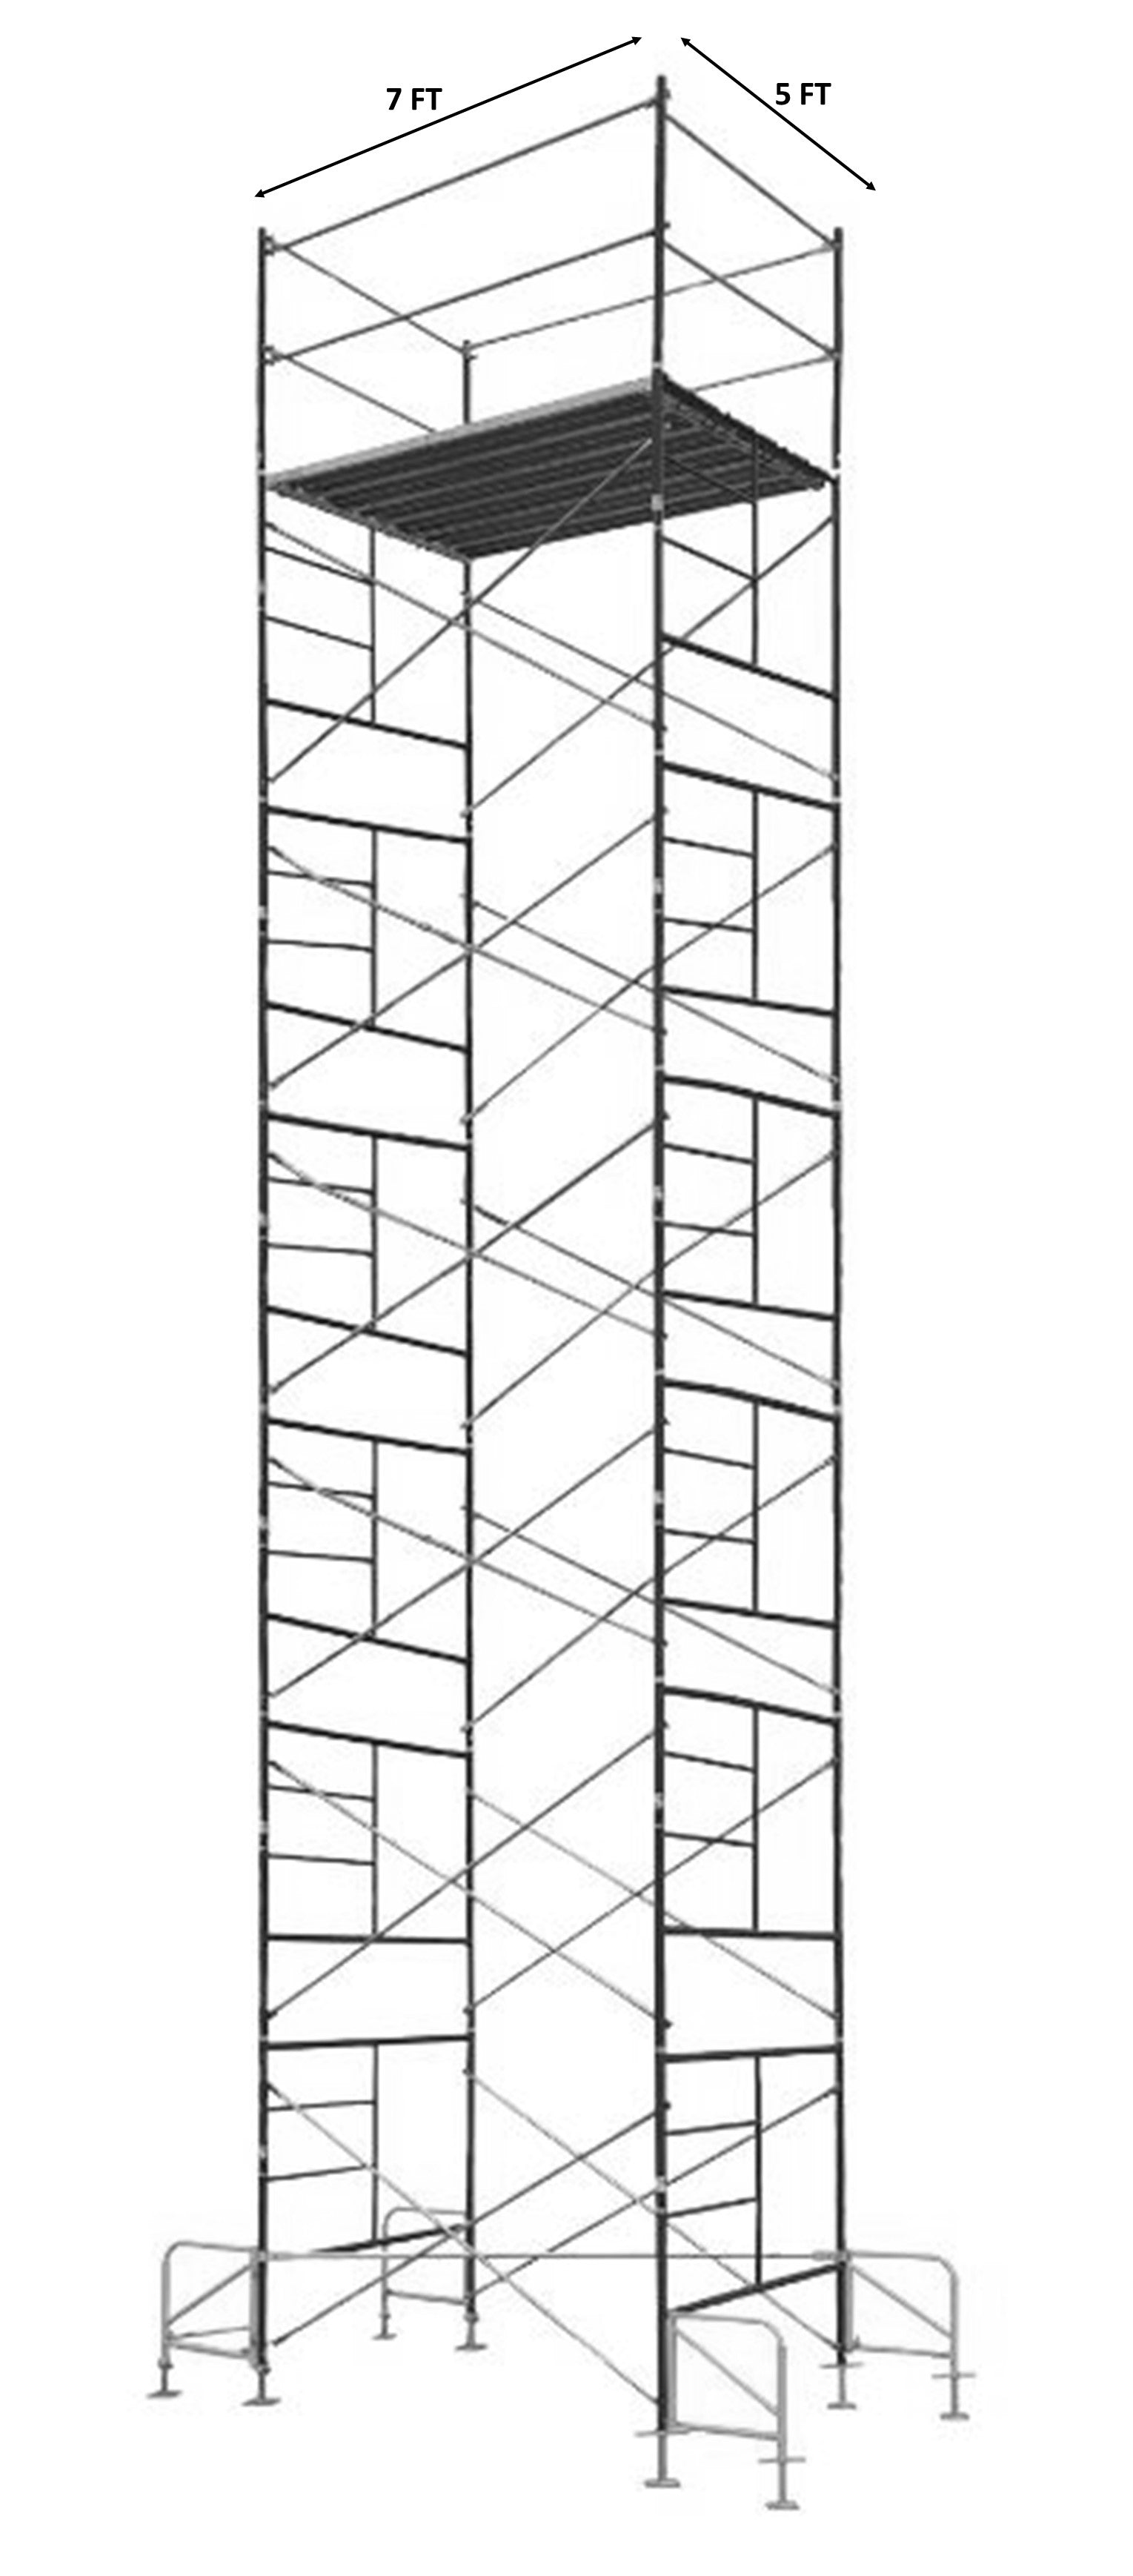 Contractor Mason Scaffolds Stationary Tower 30 Ft High 7 Ft Long, 5 Ft Wide with Guard Rails